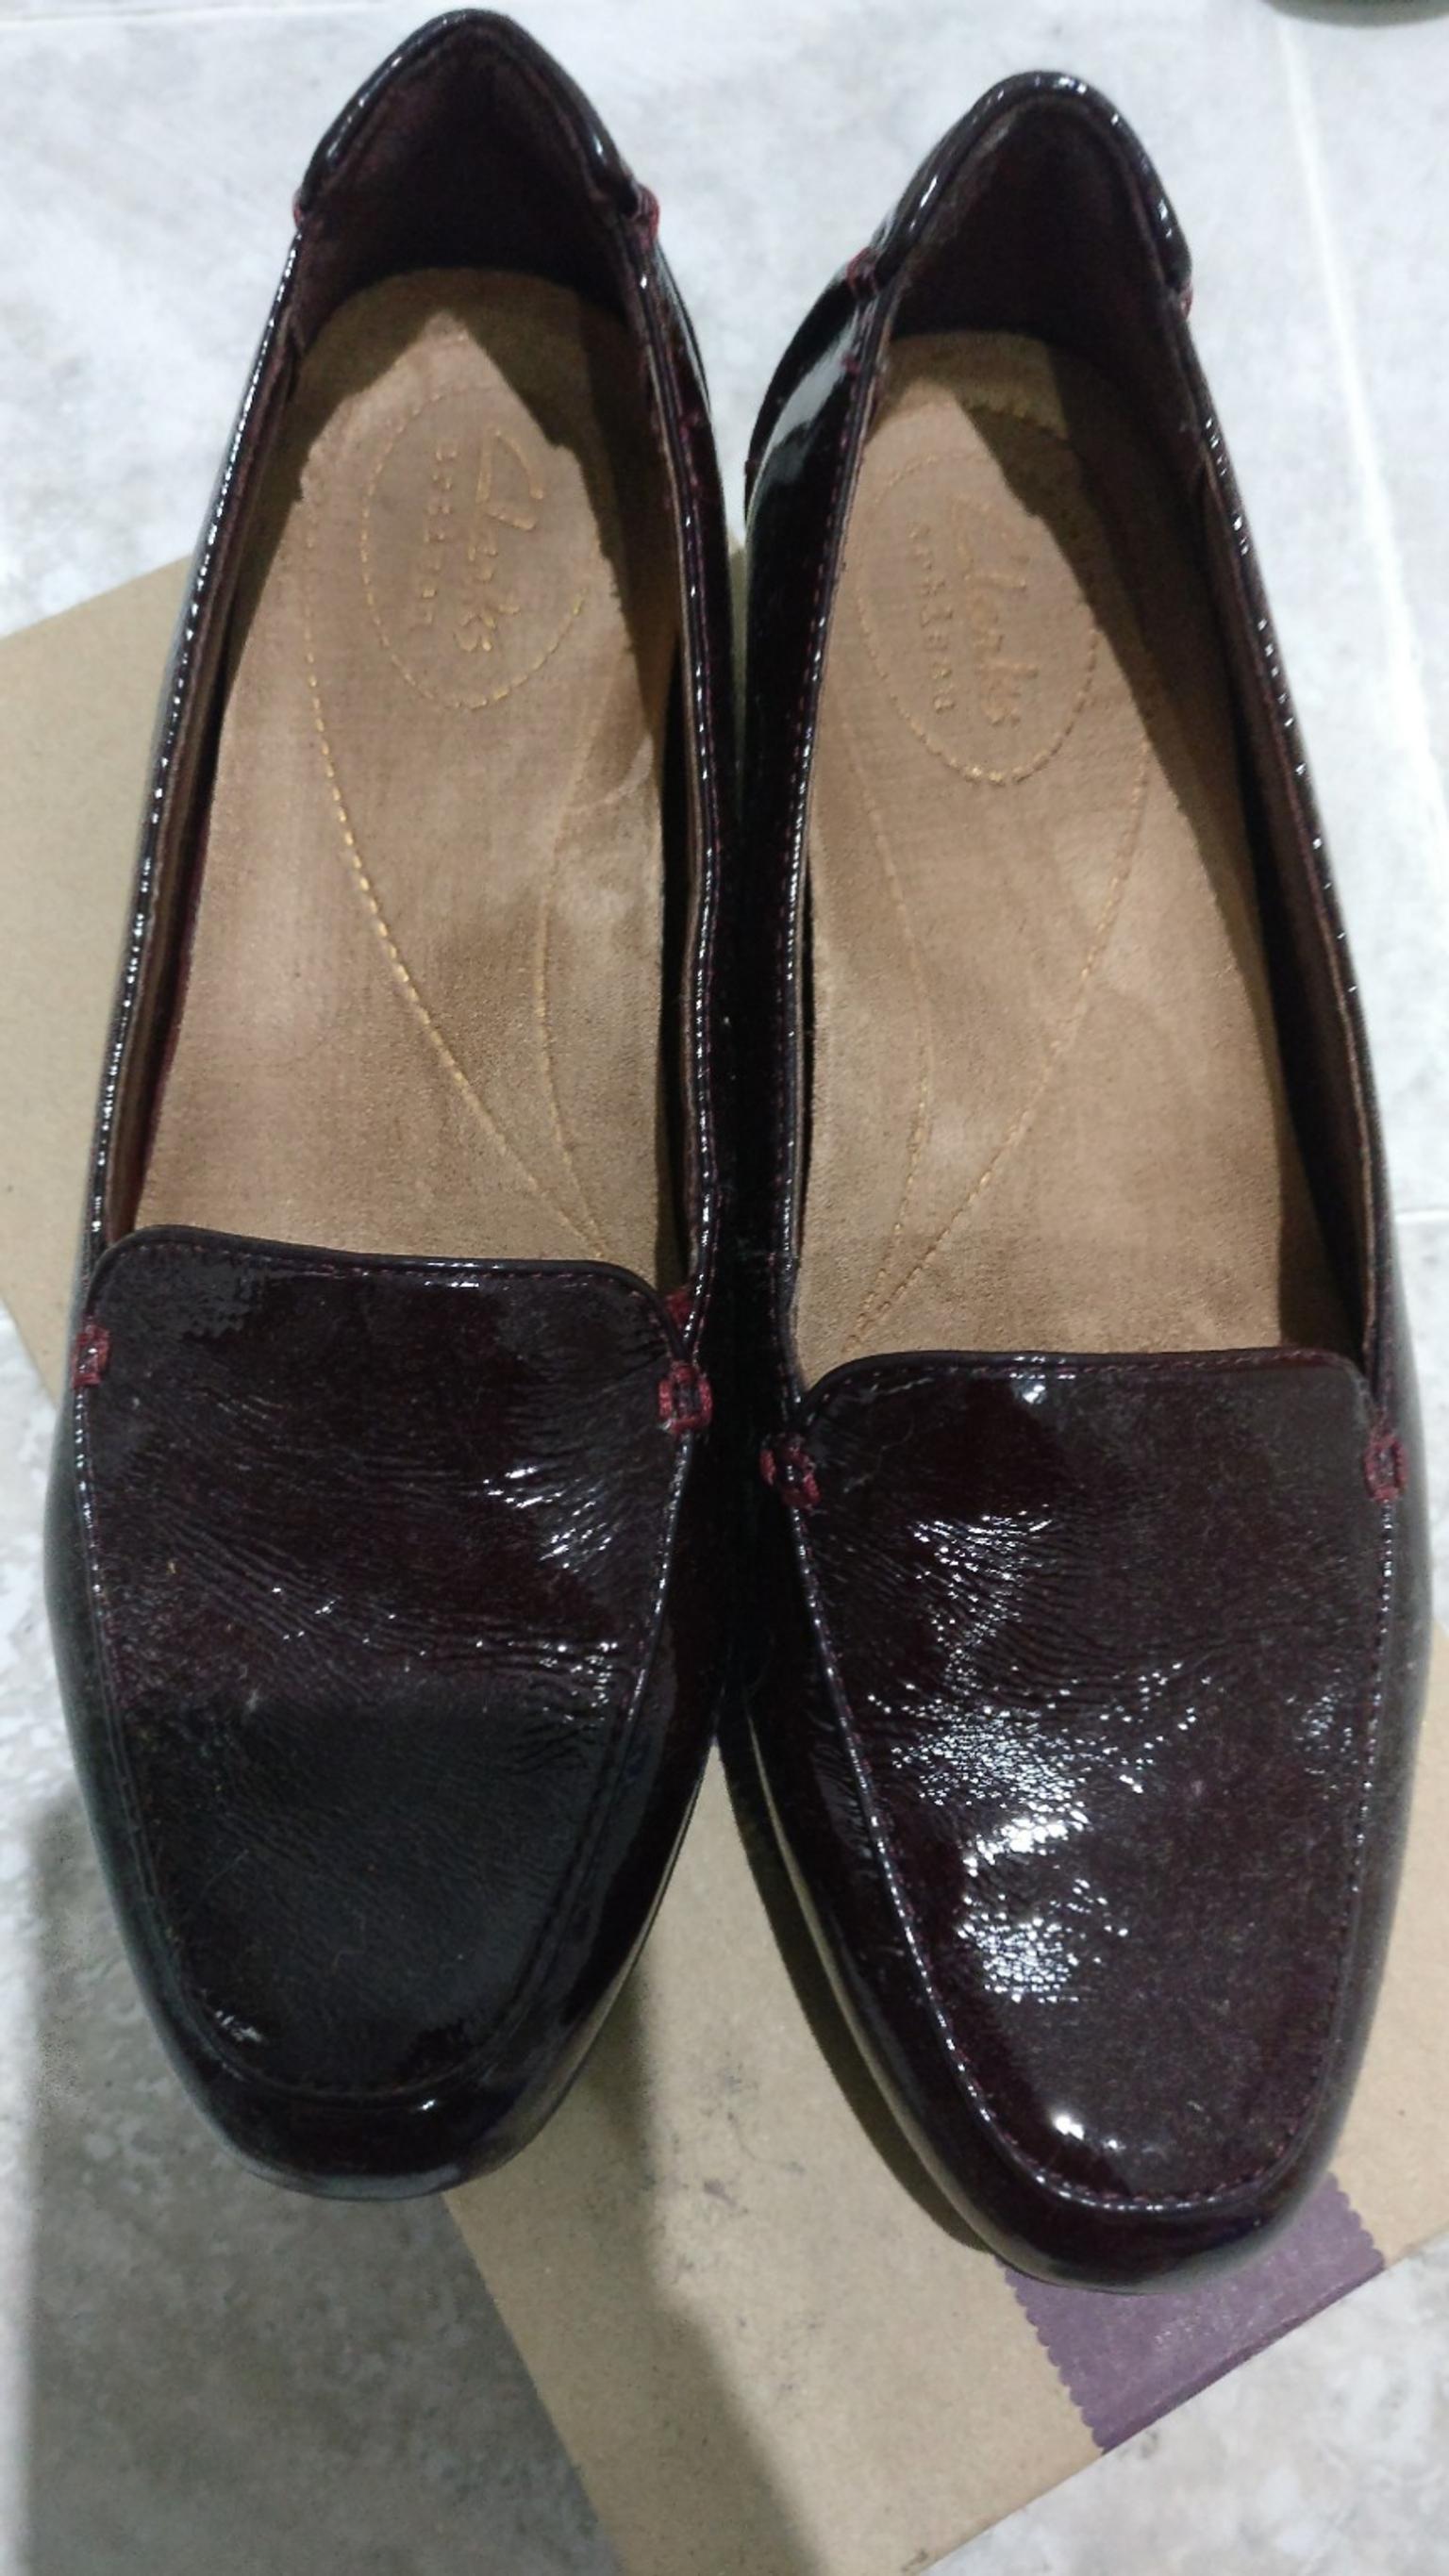 clarks burgundy loafers